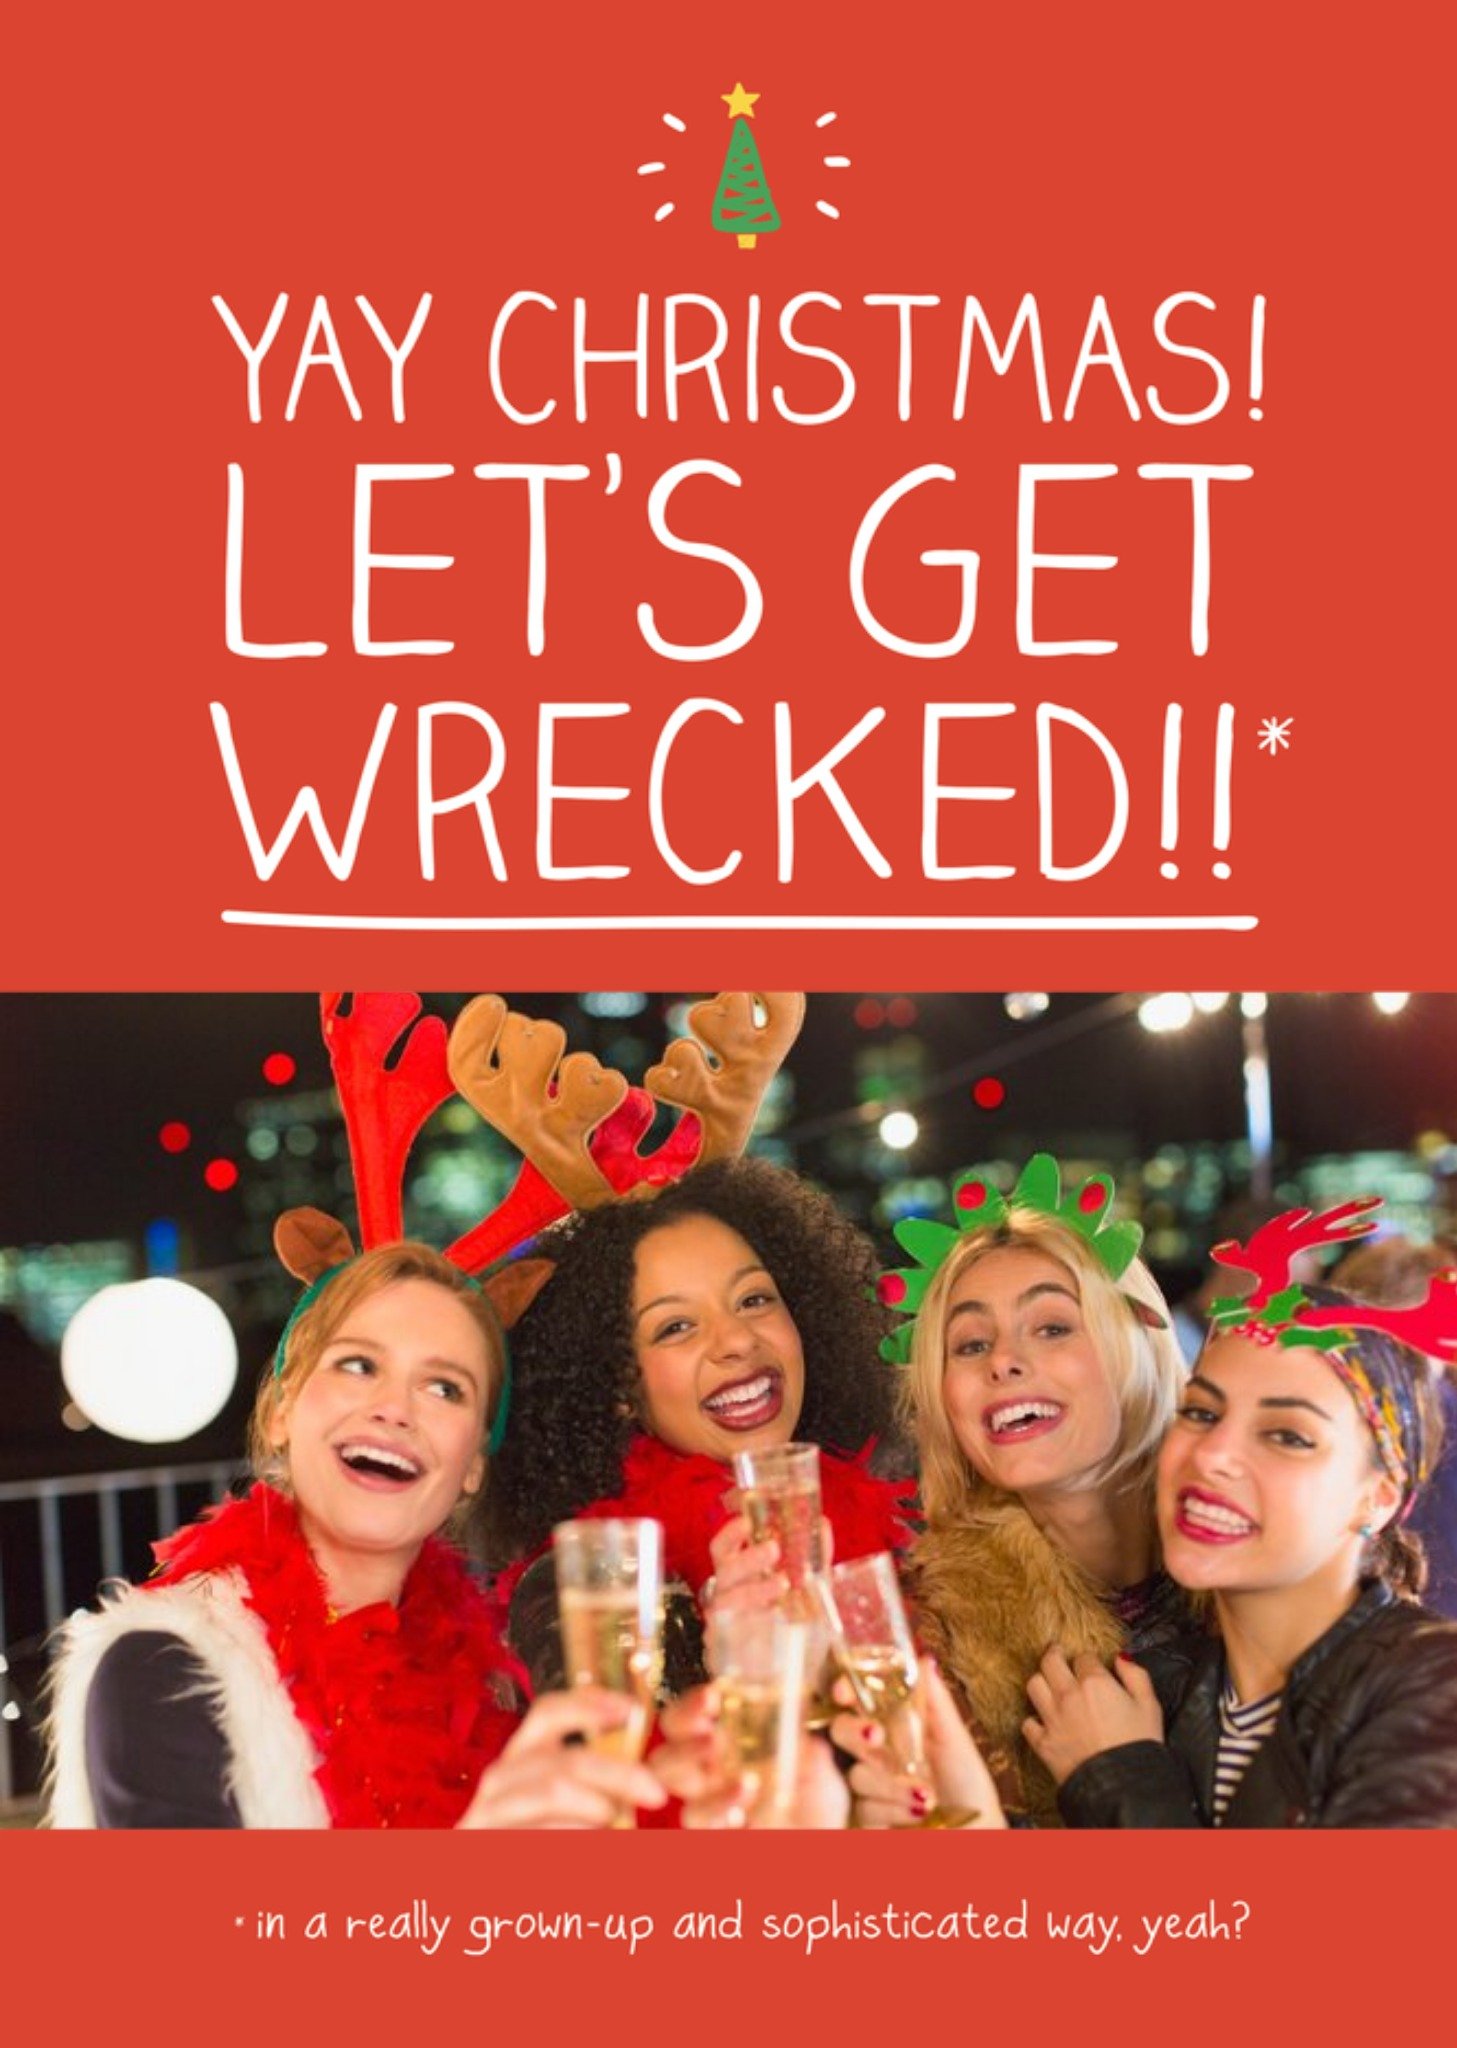 Happy Jackson Let's Get Wrecked Personalised Photo Upload Christmas Card Ecard